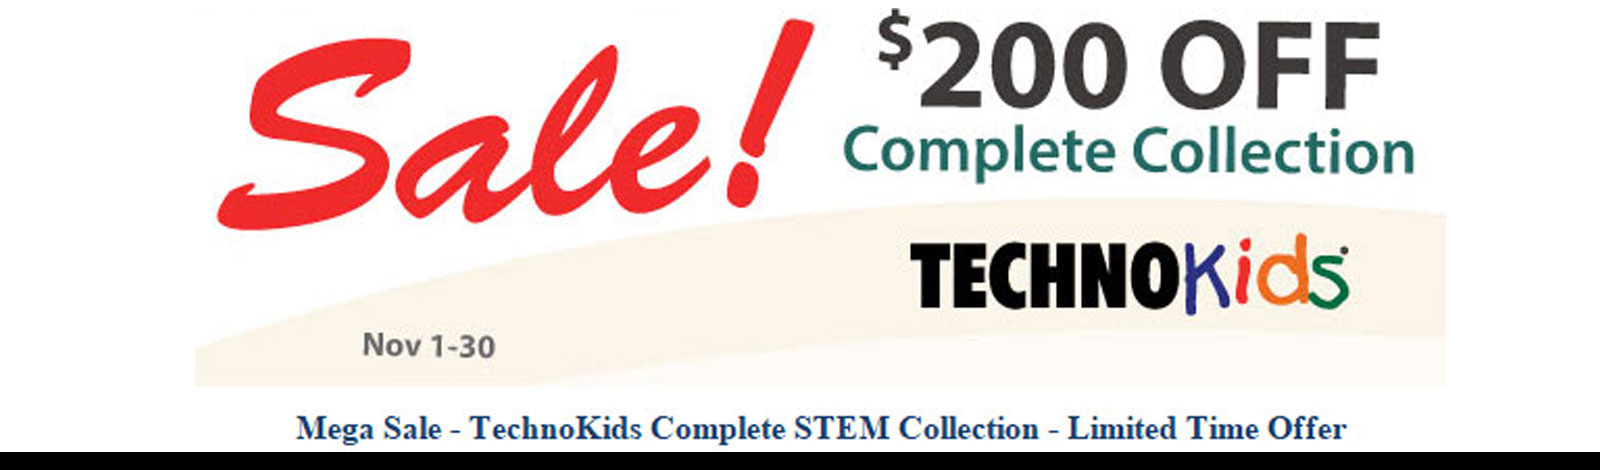 Save $200 -Technokids Complete Collection